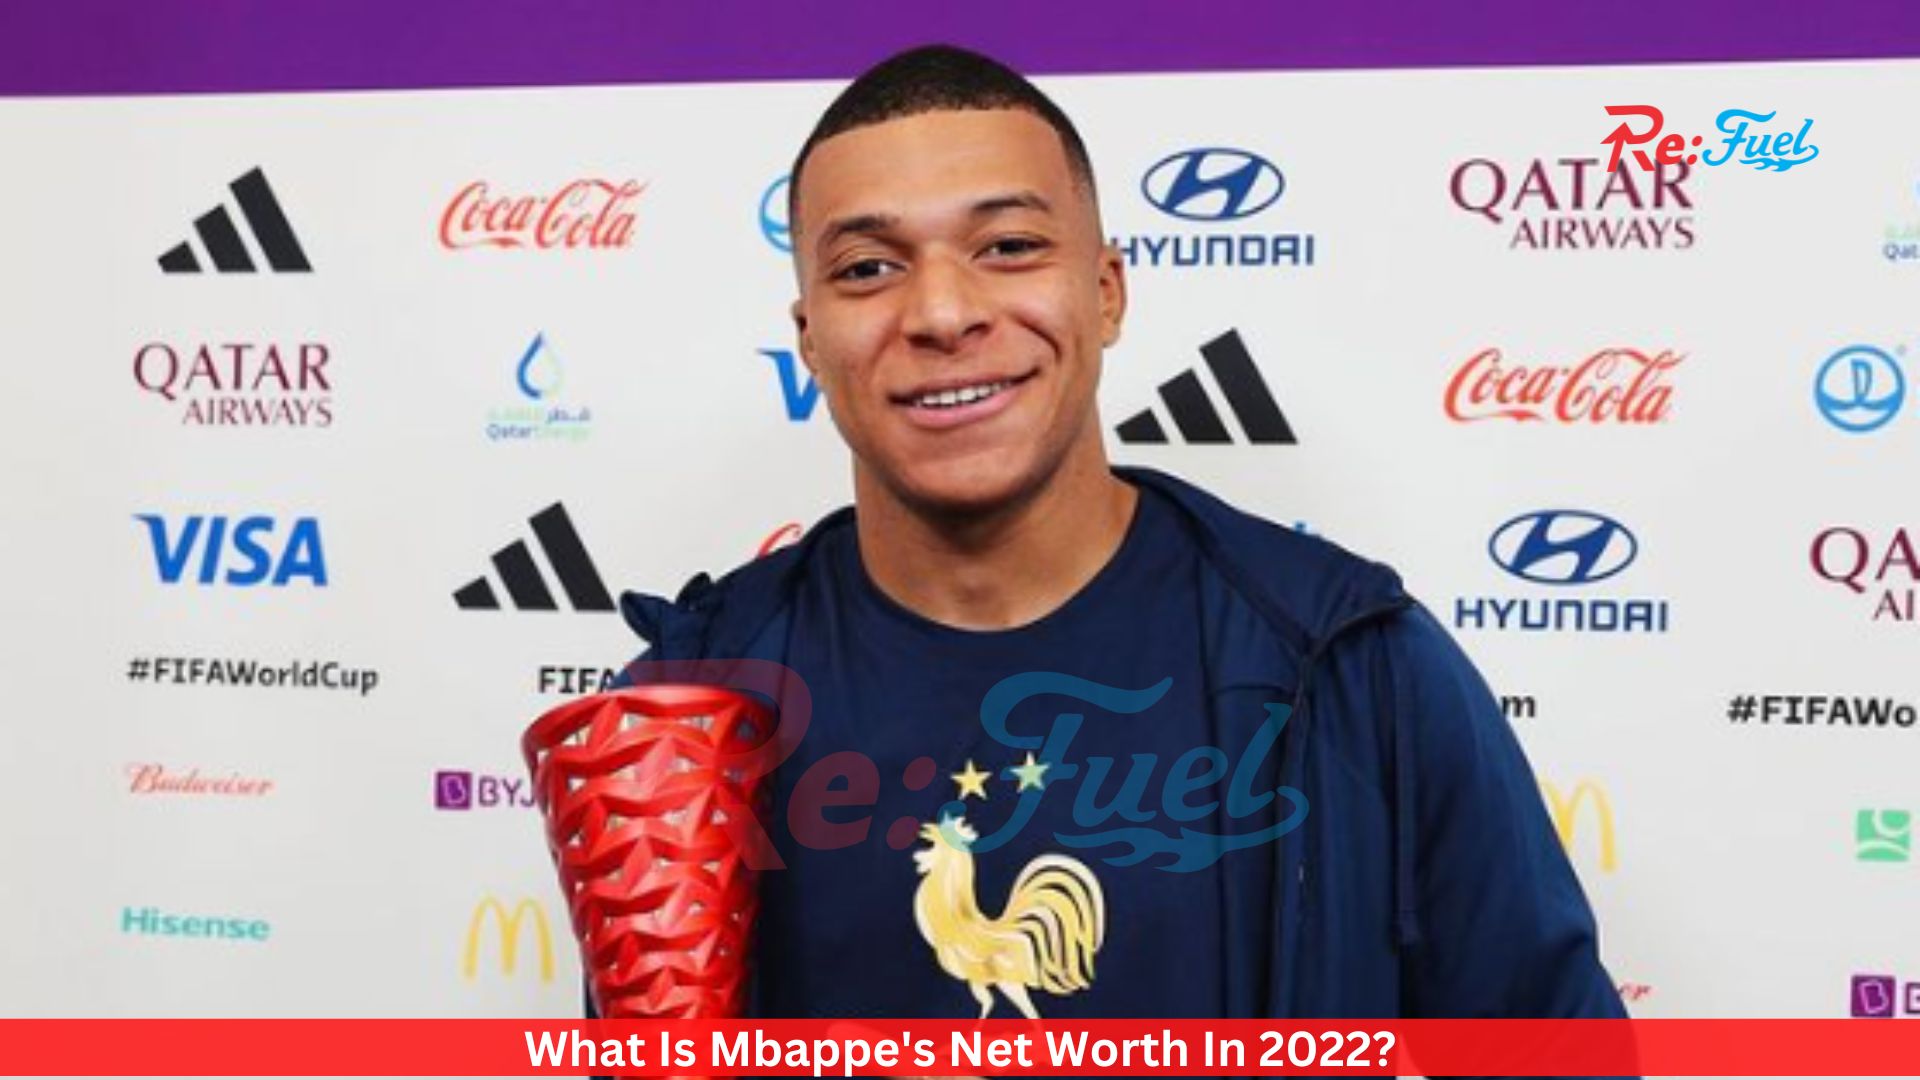 What Is Mbappe's Net Worth In 2022?